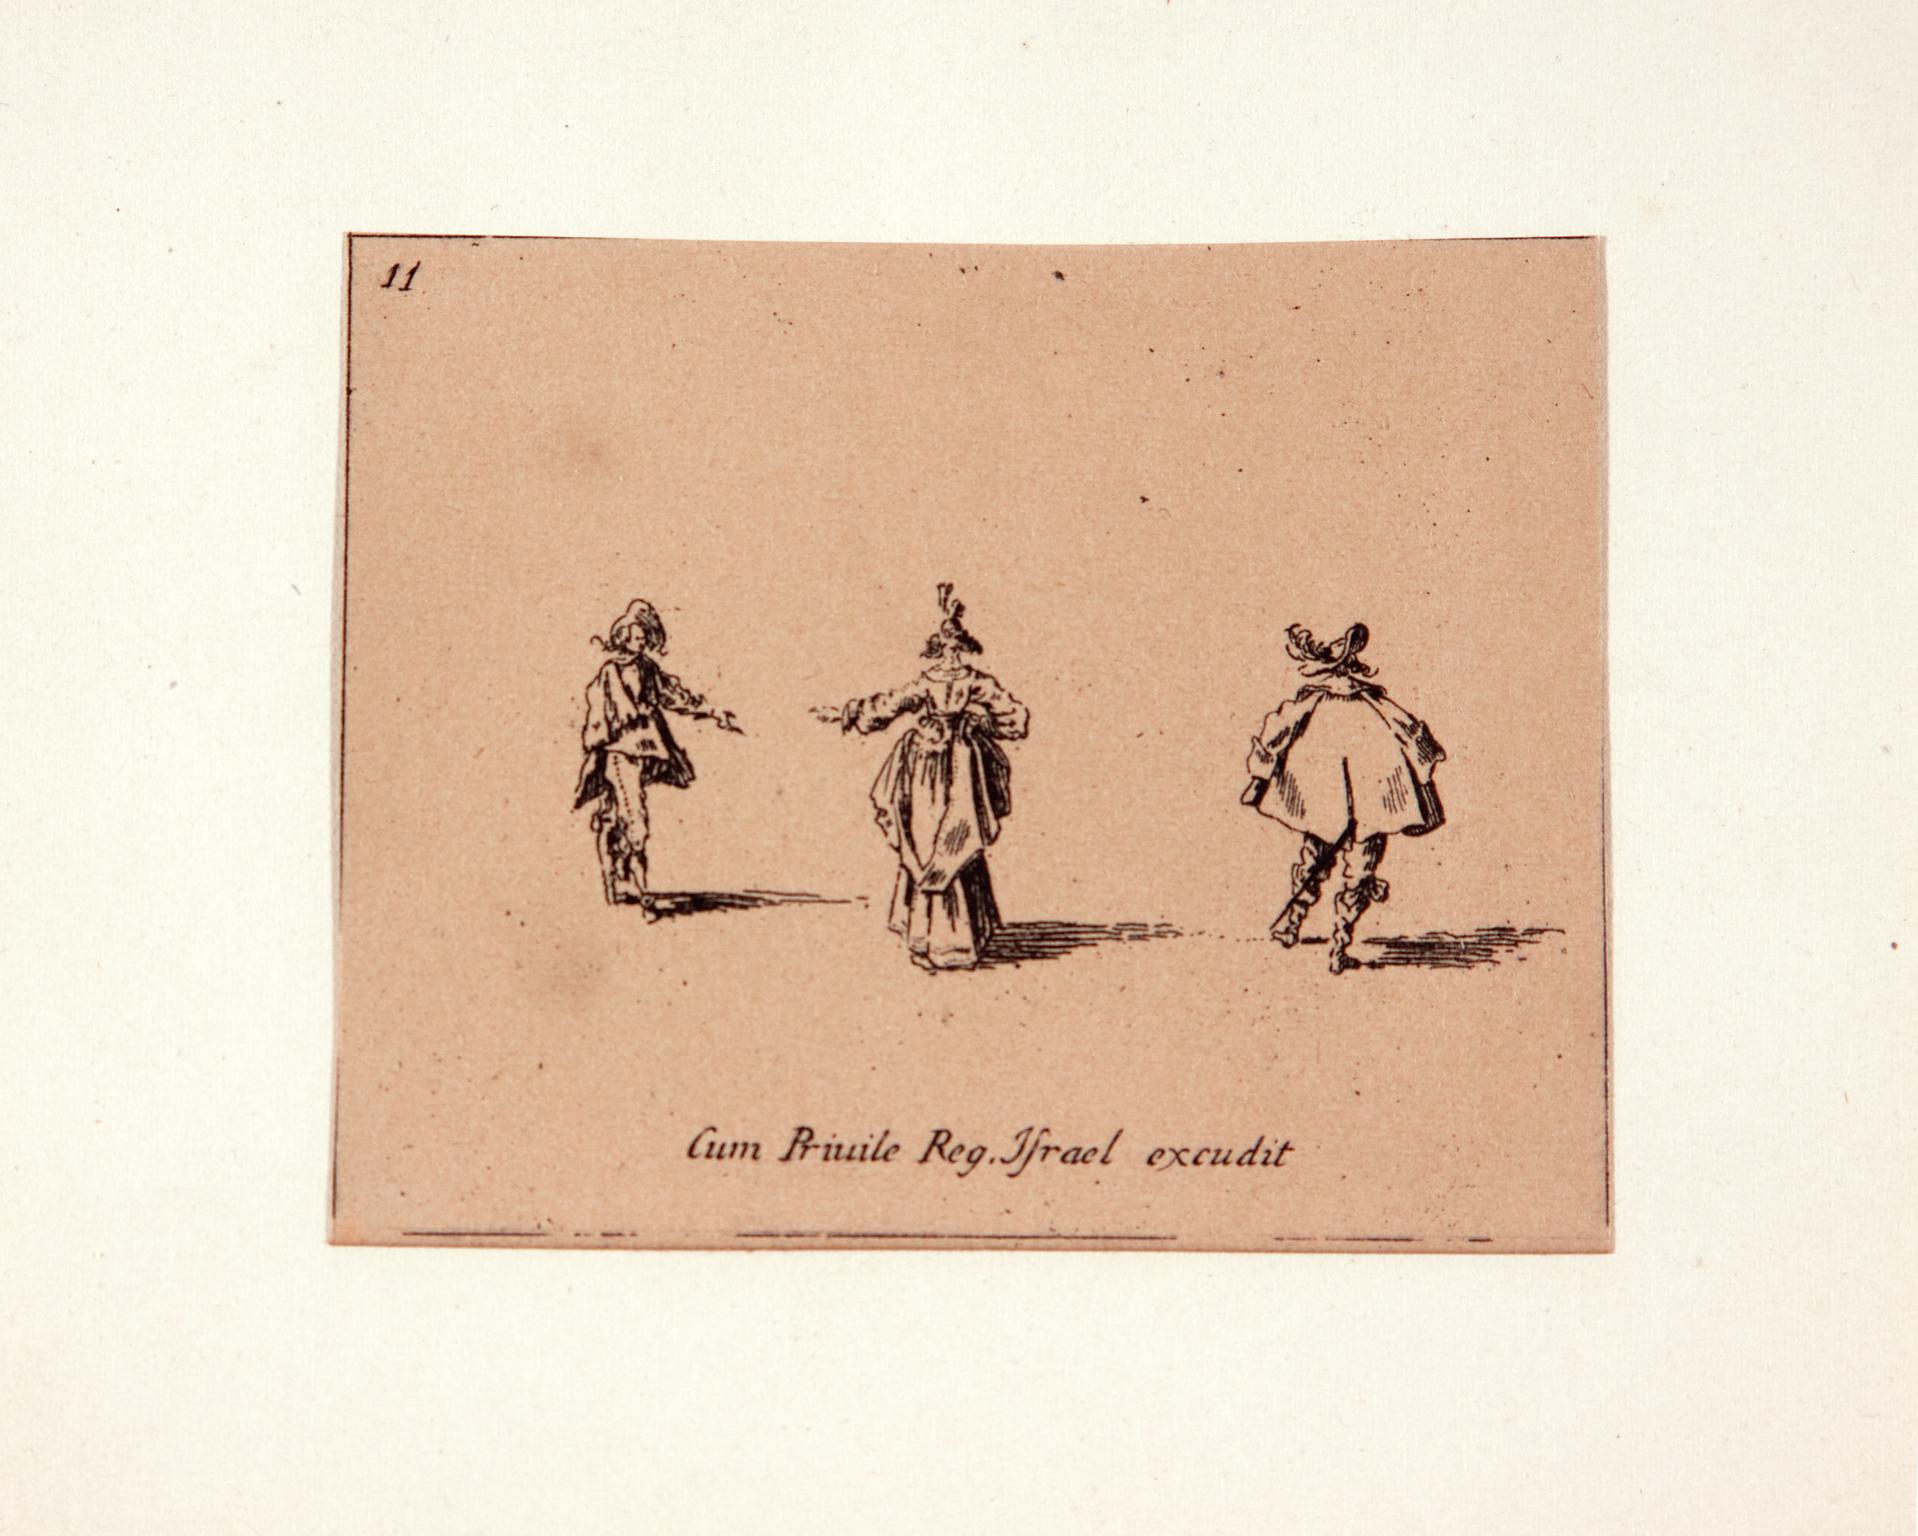 Three courtiers of Louis XIII